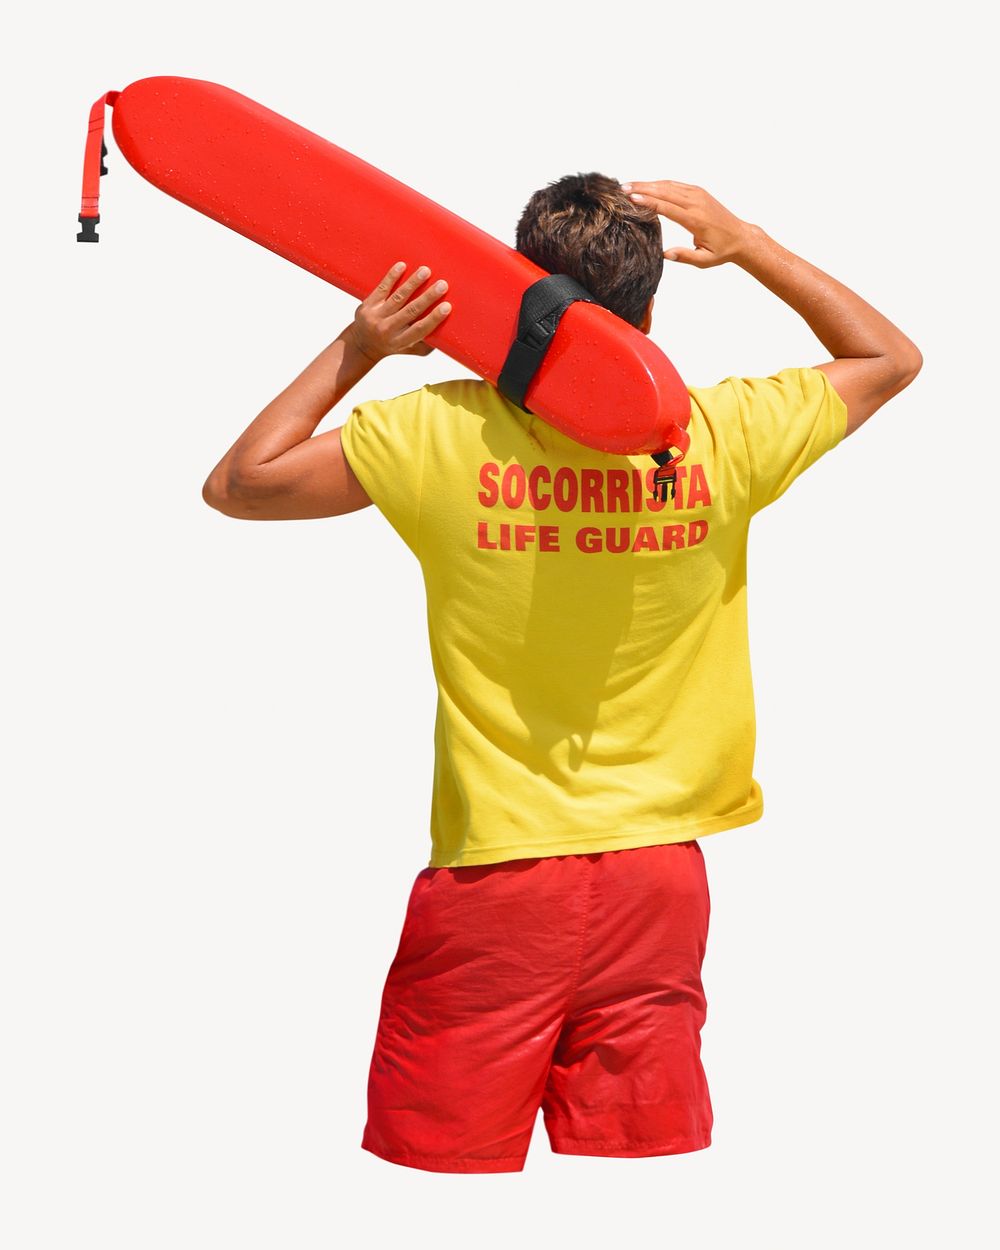 Beach security lifeguard isolated image